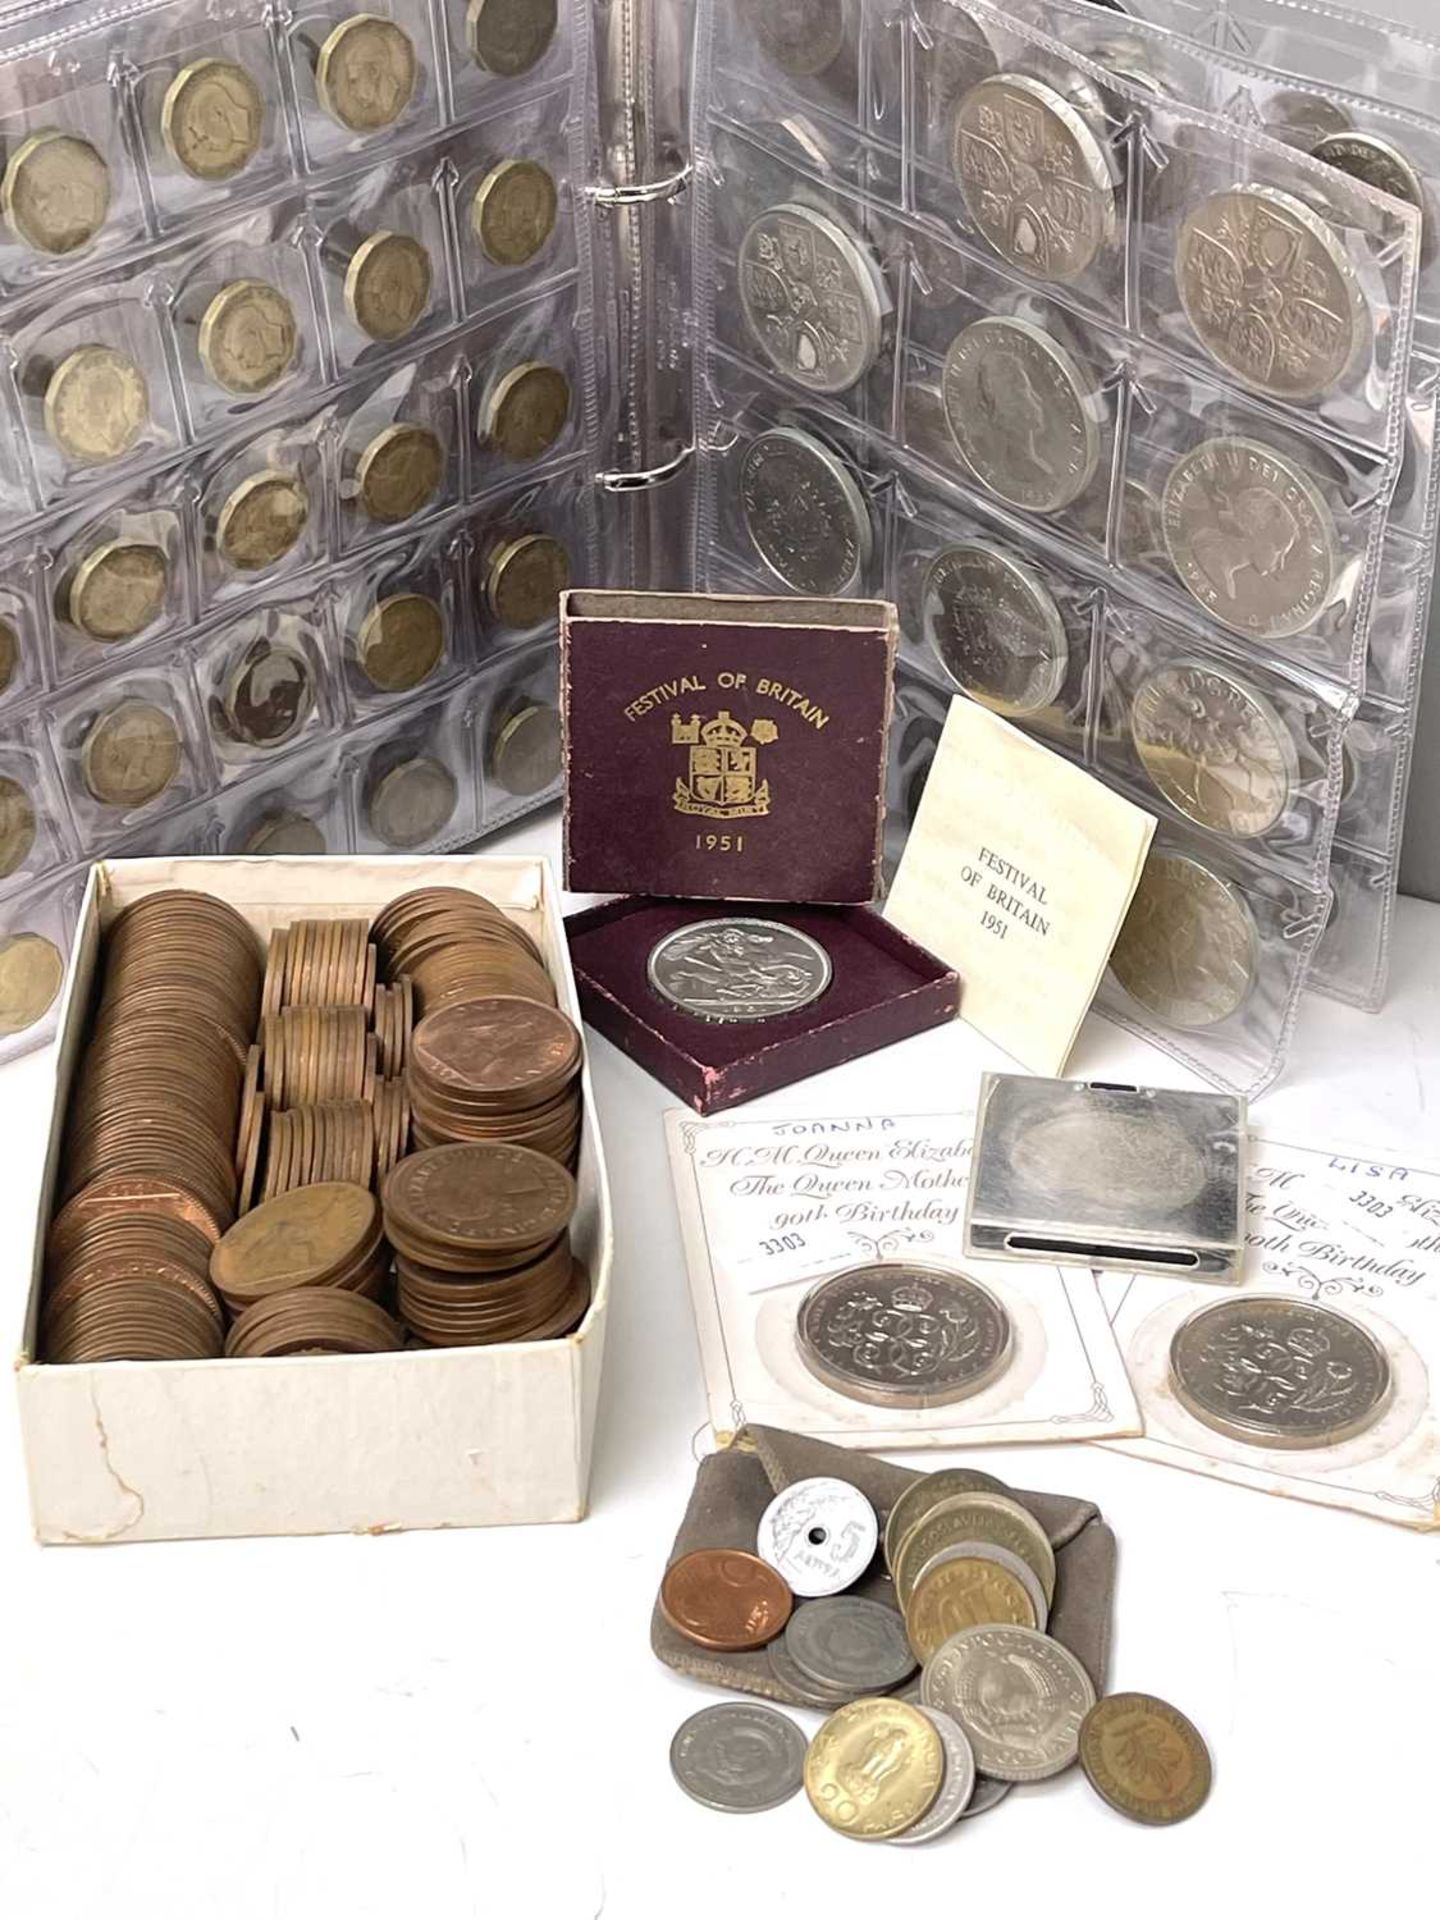 Great Britain, etc coins Lot comprises 4 x £2 brass and 2 x £5 decimal coins, a 1951 boxed - Image 2 of 7